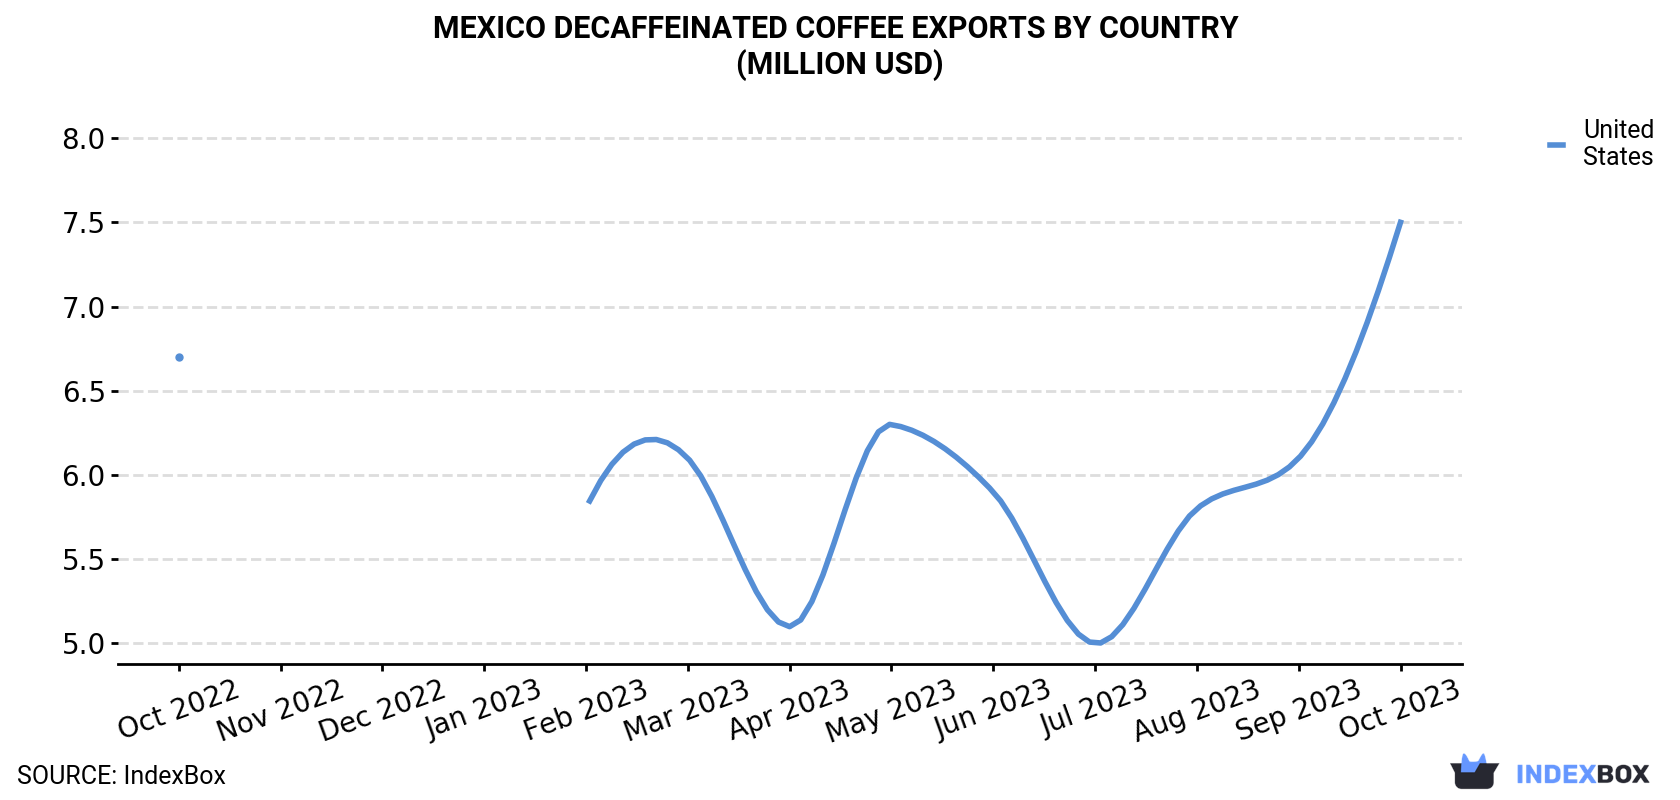 Mexico Decaffeinated Coffee Exports By Country (Million USD)